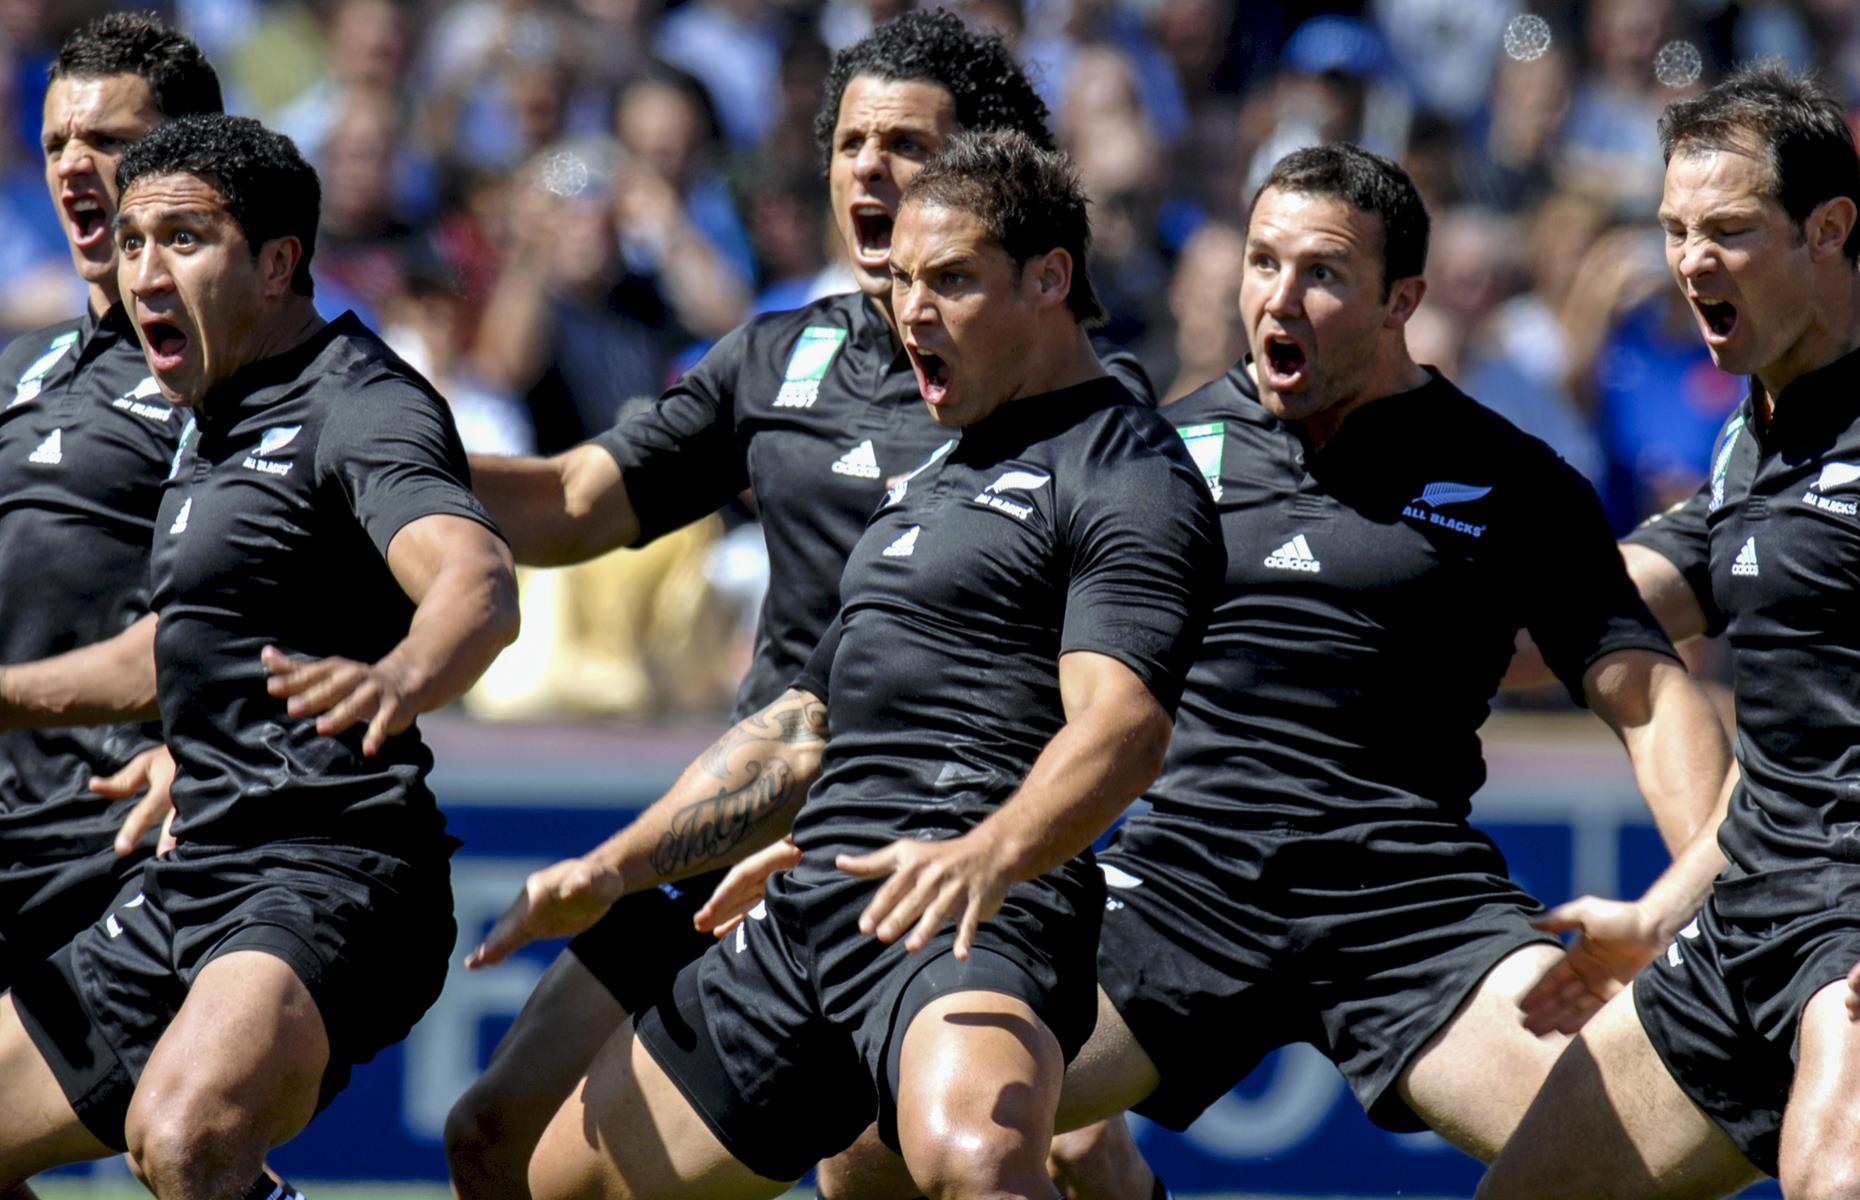 <p>The haka is a complex dance and traditional Māori challenge that tribes built their reputation on. The intensity and ferocity of the All Blacks performing either Ka Mate or their own haka Kapa O Pango before a game is not easily forgotten. Catch a game at one of the international stadiums across New Zealand, from Auckland to Dunedin.</p>